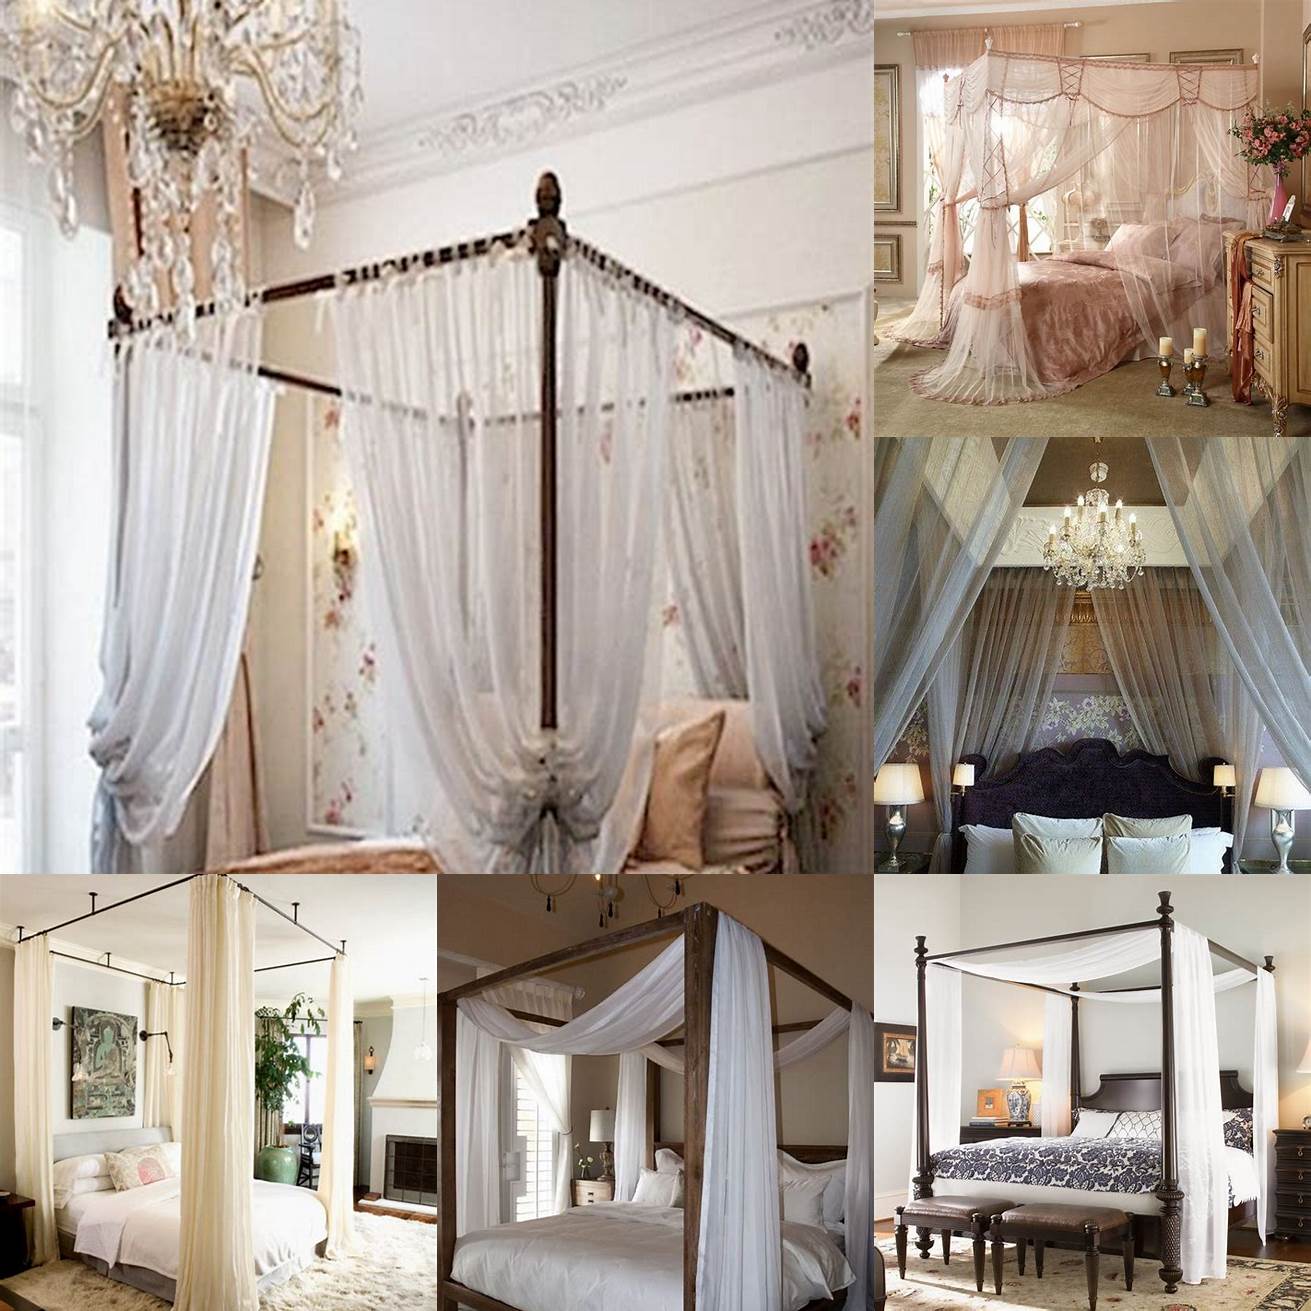 A romantic bedroom with a canopy bed